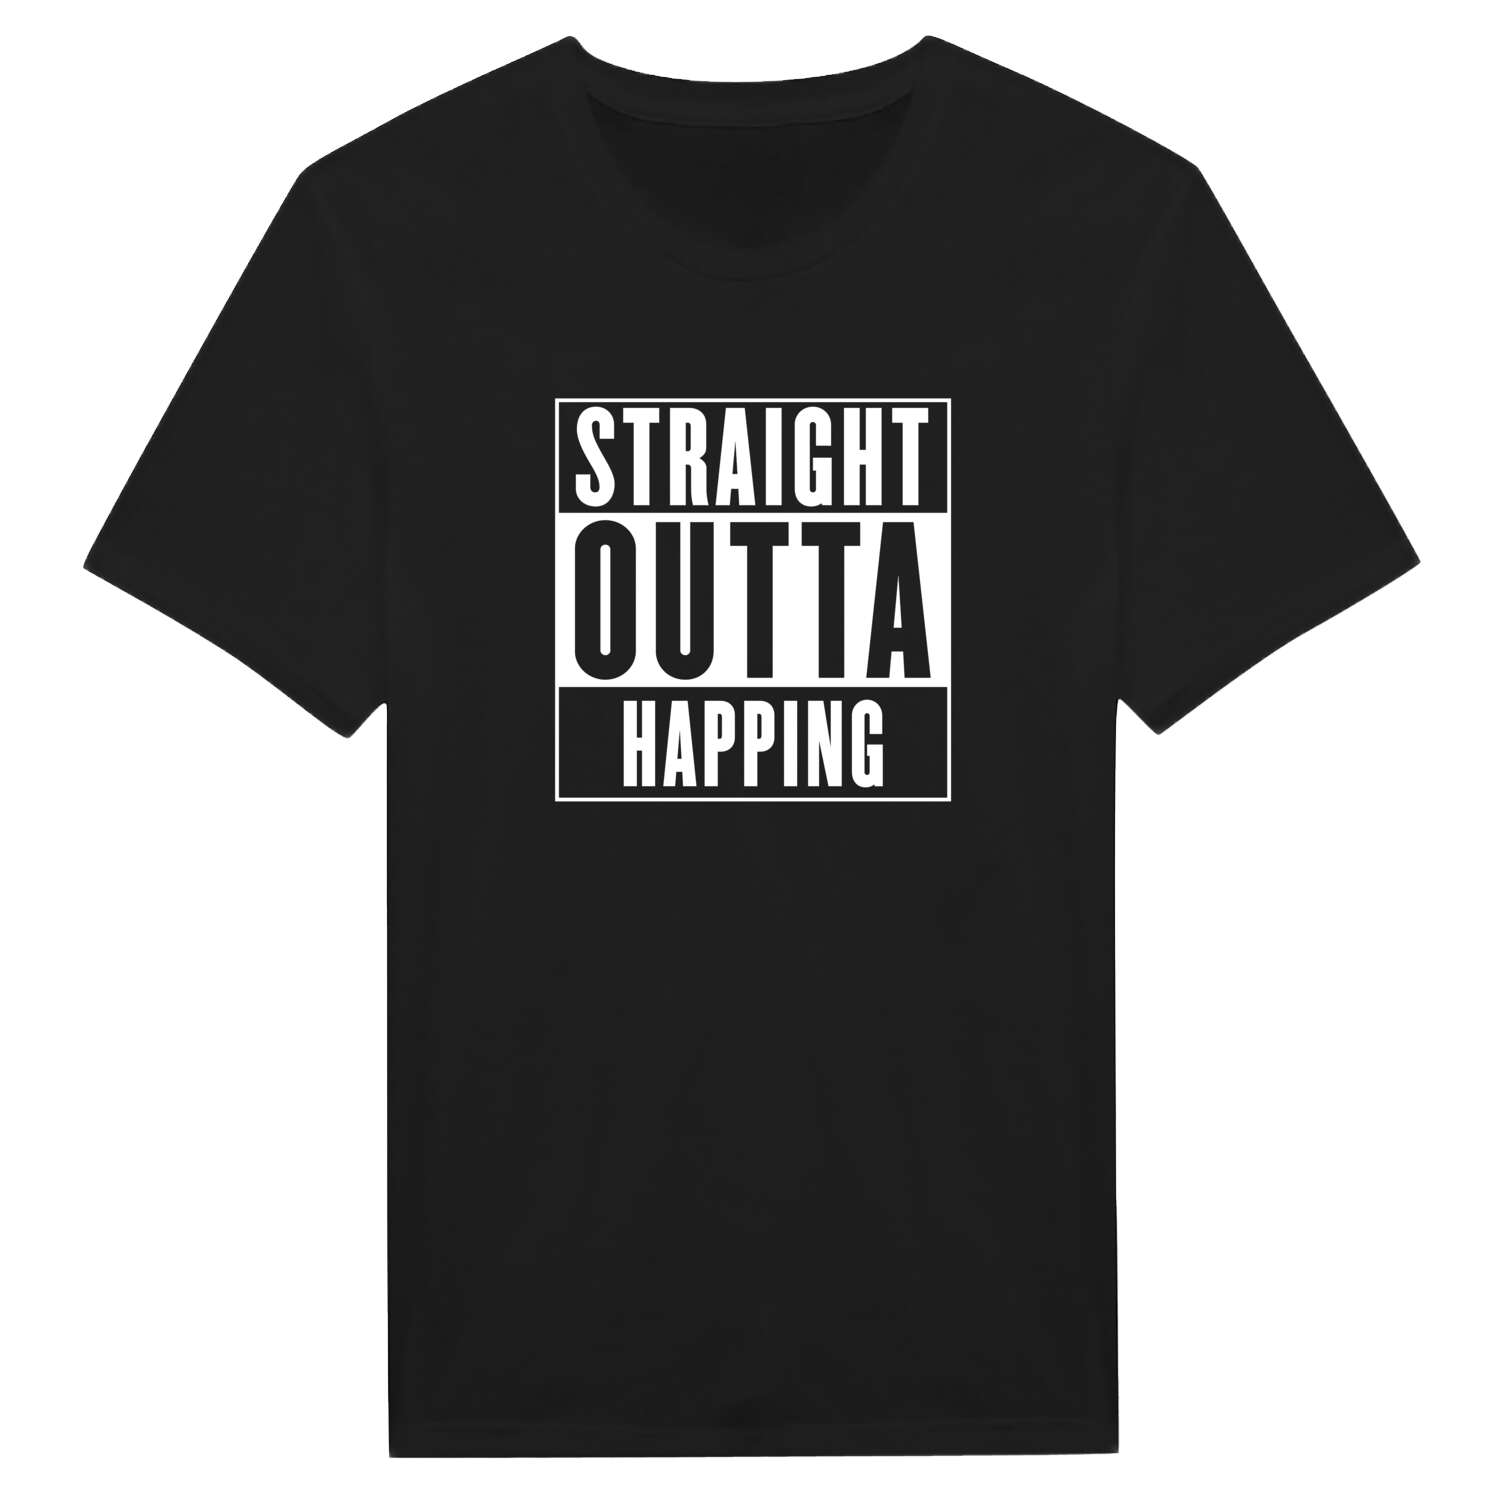 Happing T-Shirt »Straight Outta«